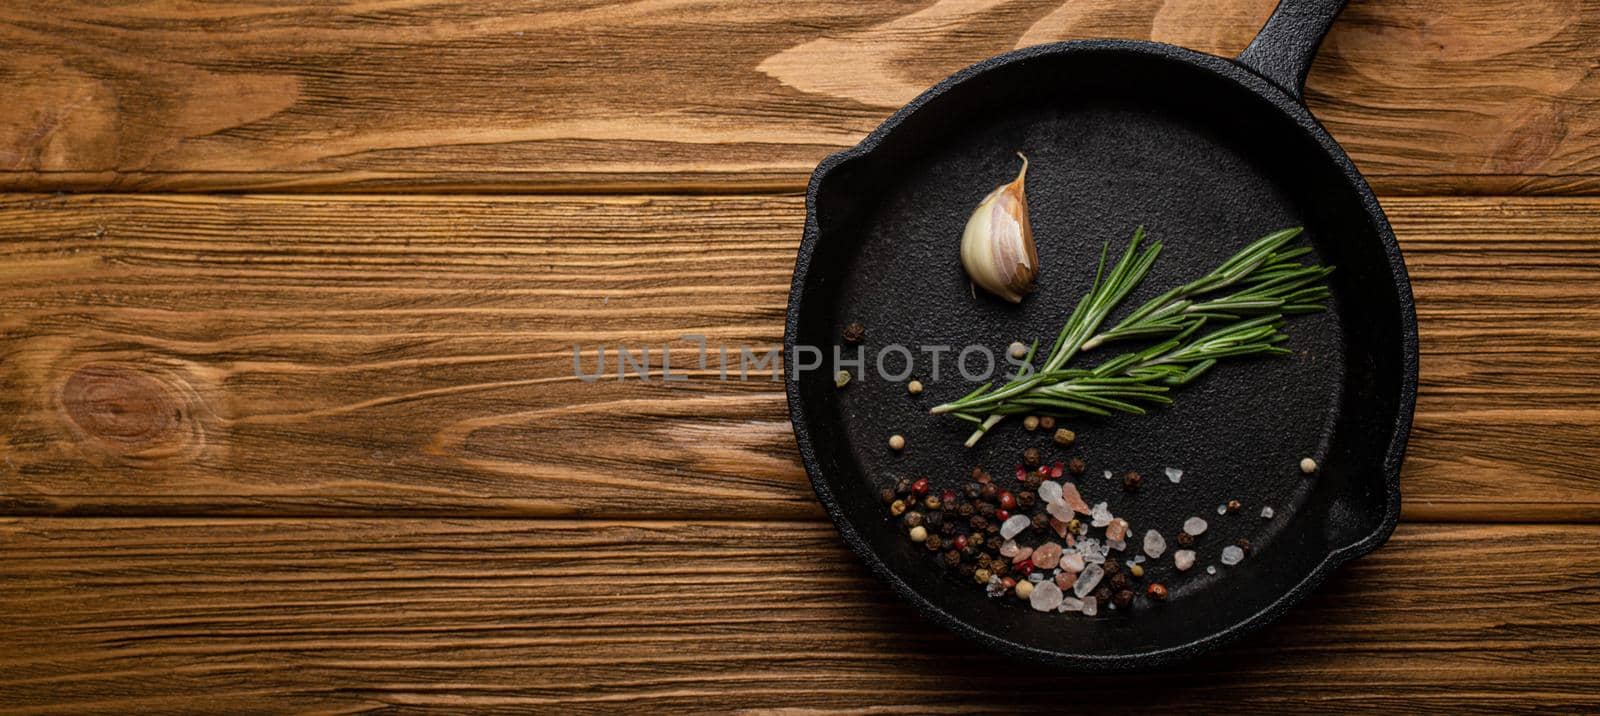 Black cast iron frying pan skillet with food cooking ingredients fresh rosemary, garlic, salt and pepper on rustic wooden table, cooking background and healthy eating kitchen concept copy space